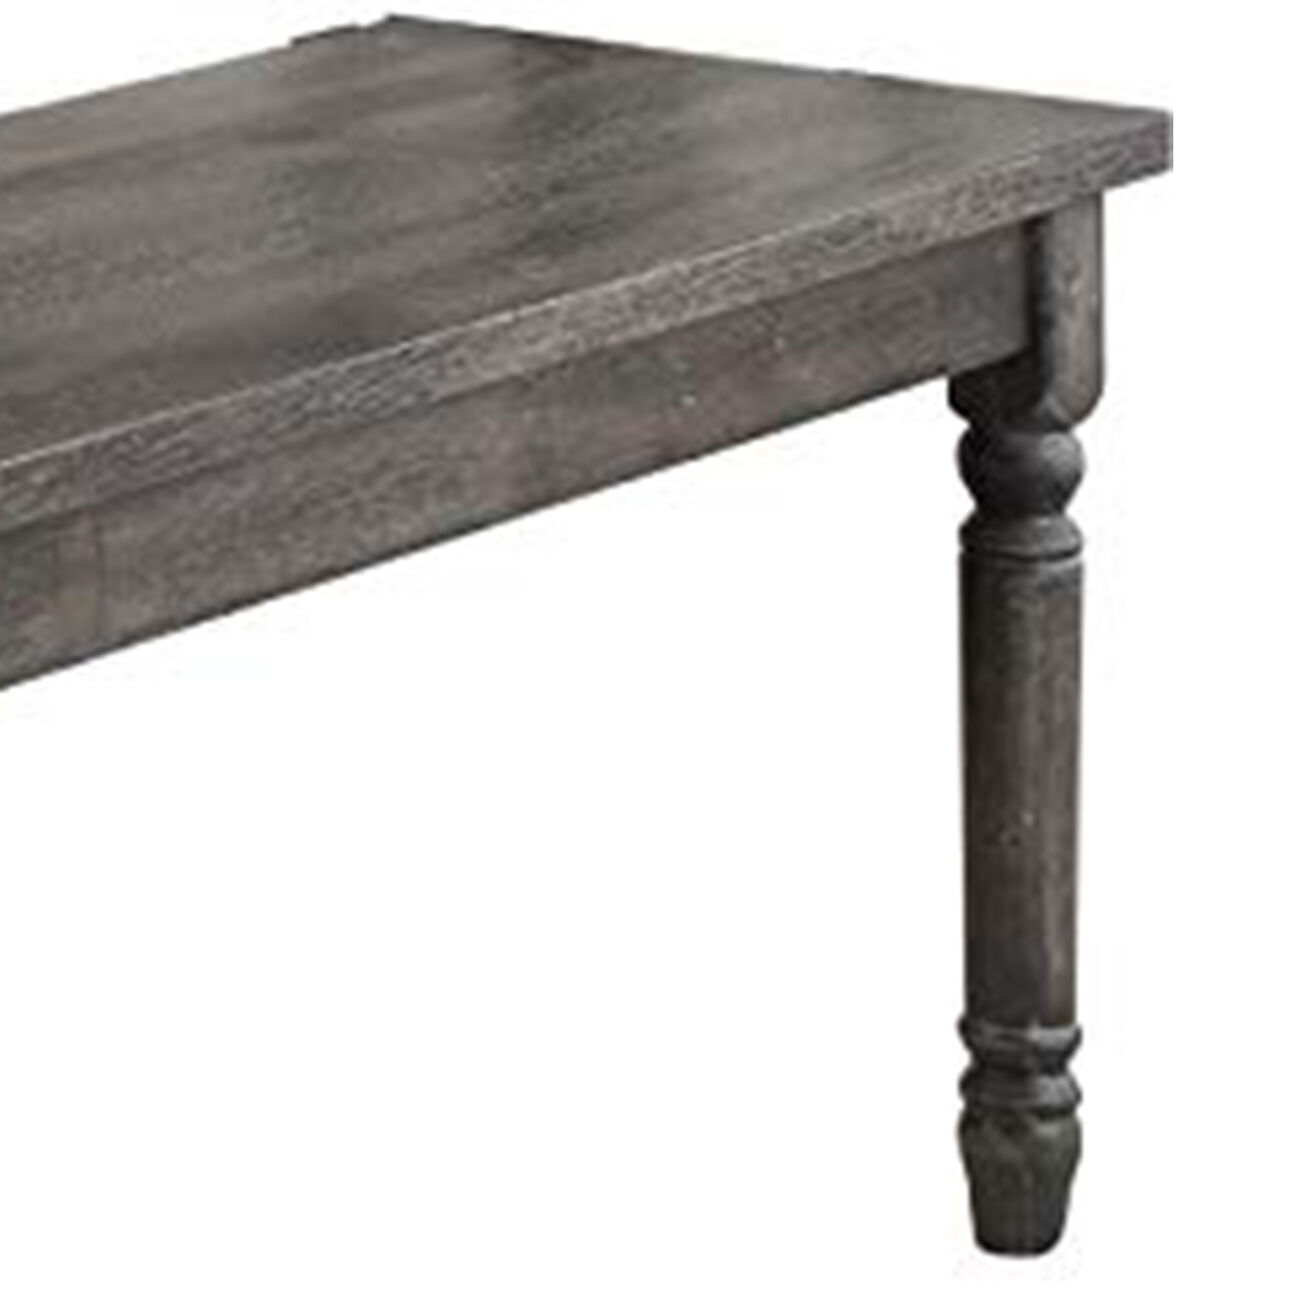 Weathered Lookinhg Dining Table, Gray